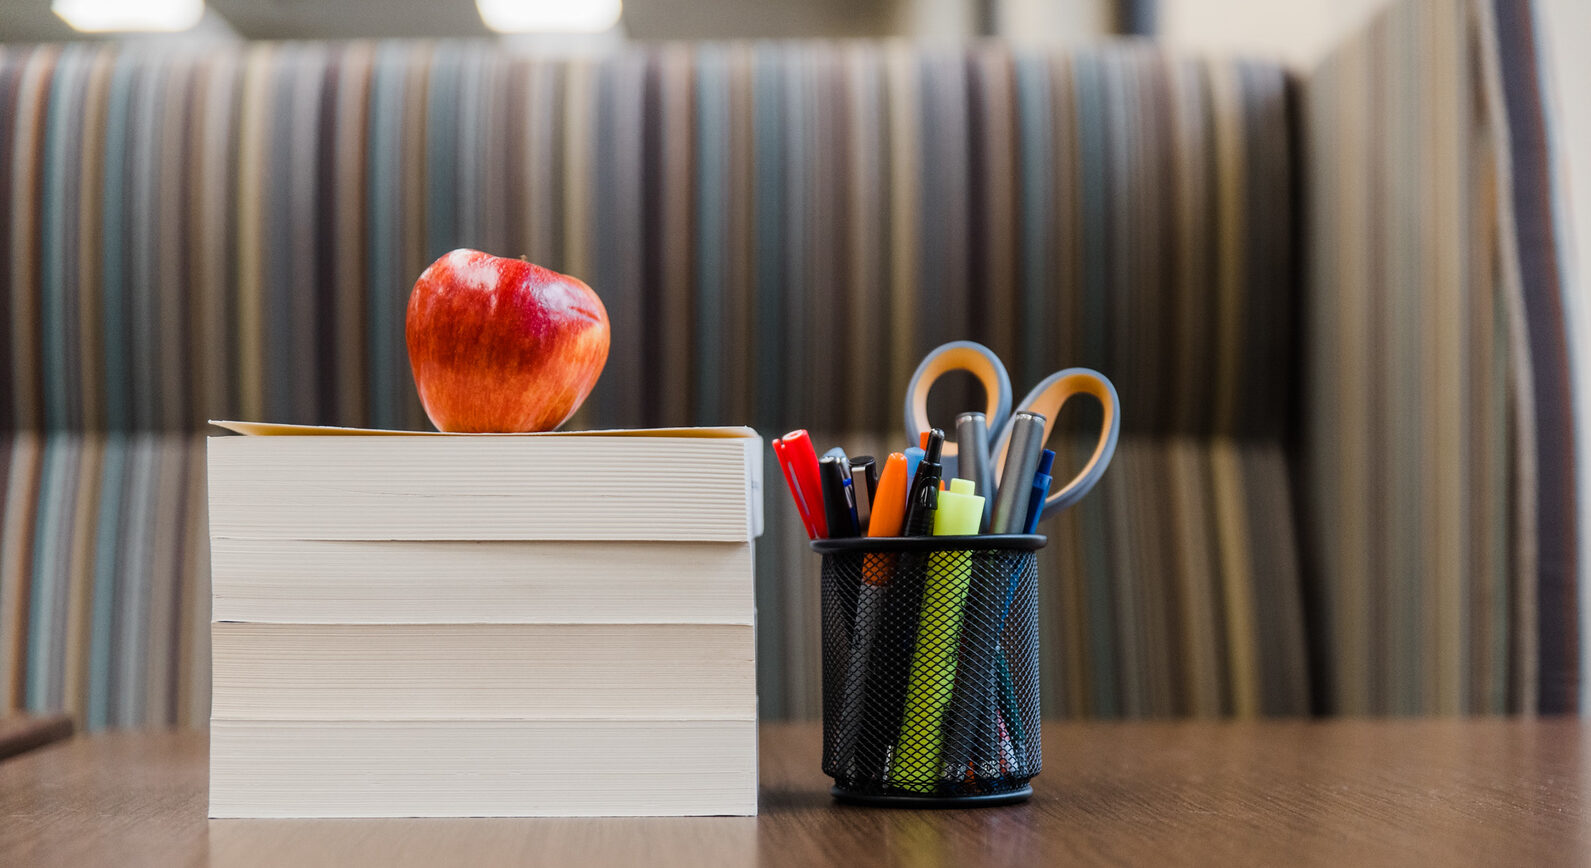 Book stack with an apple and school suppplies